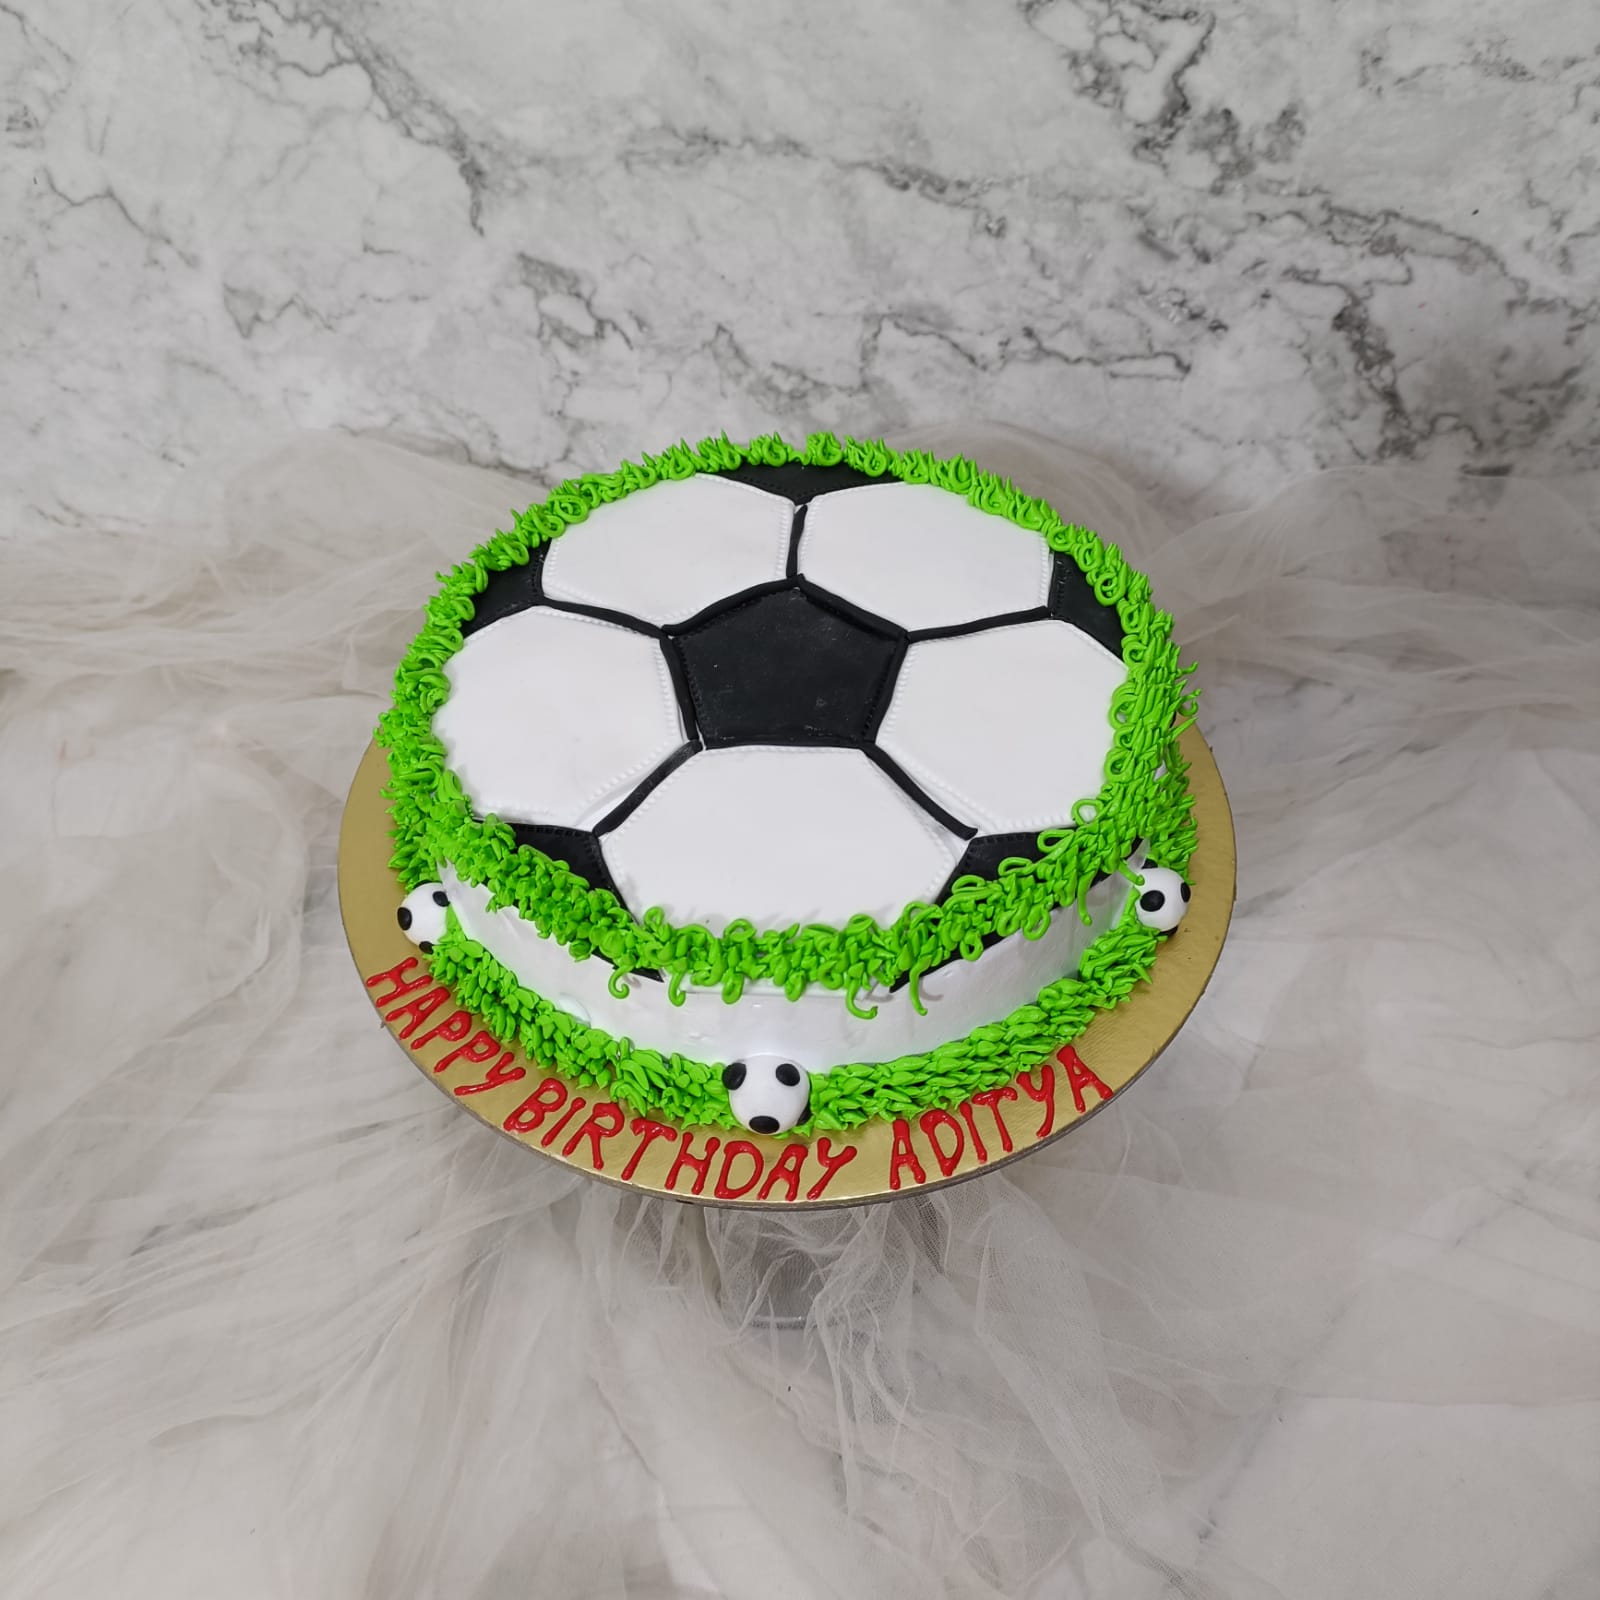 Tradditional Football Cake | Susie's Cakes